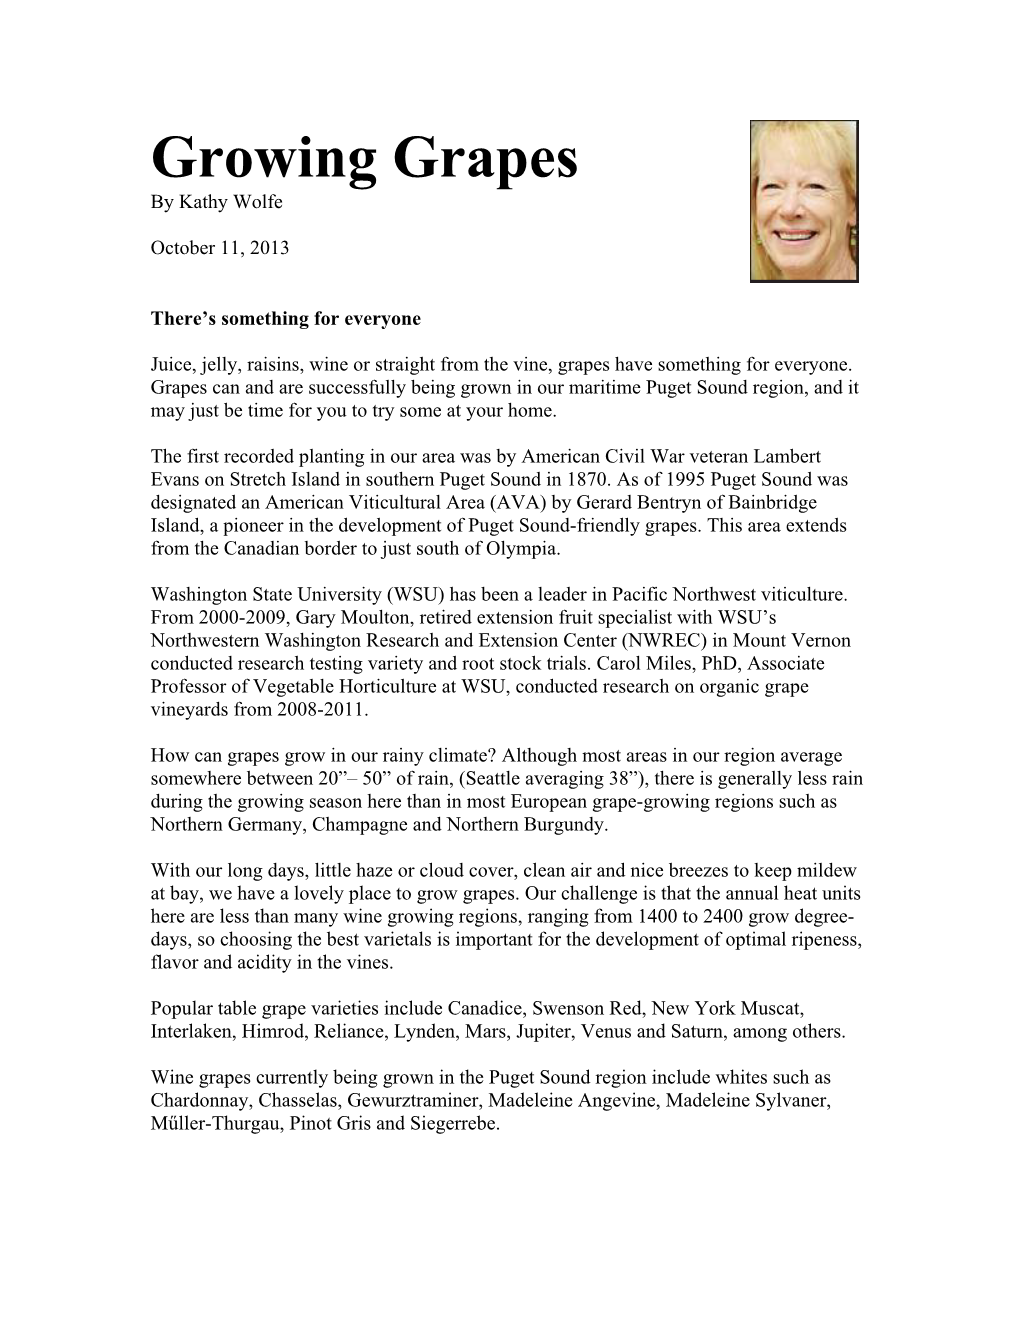 Growing Grapes by Kathy Wolfe